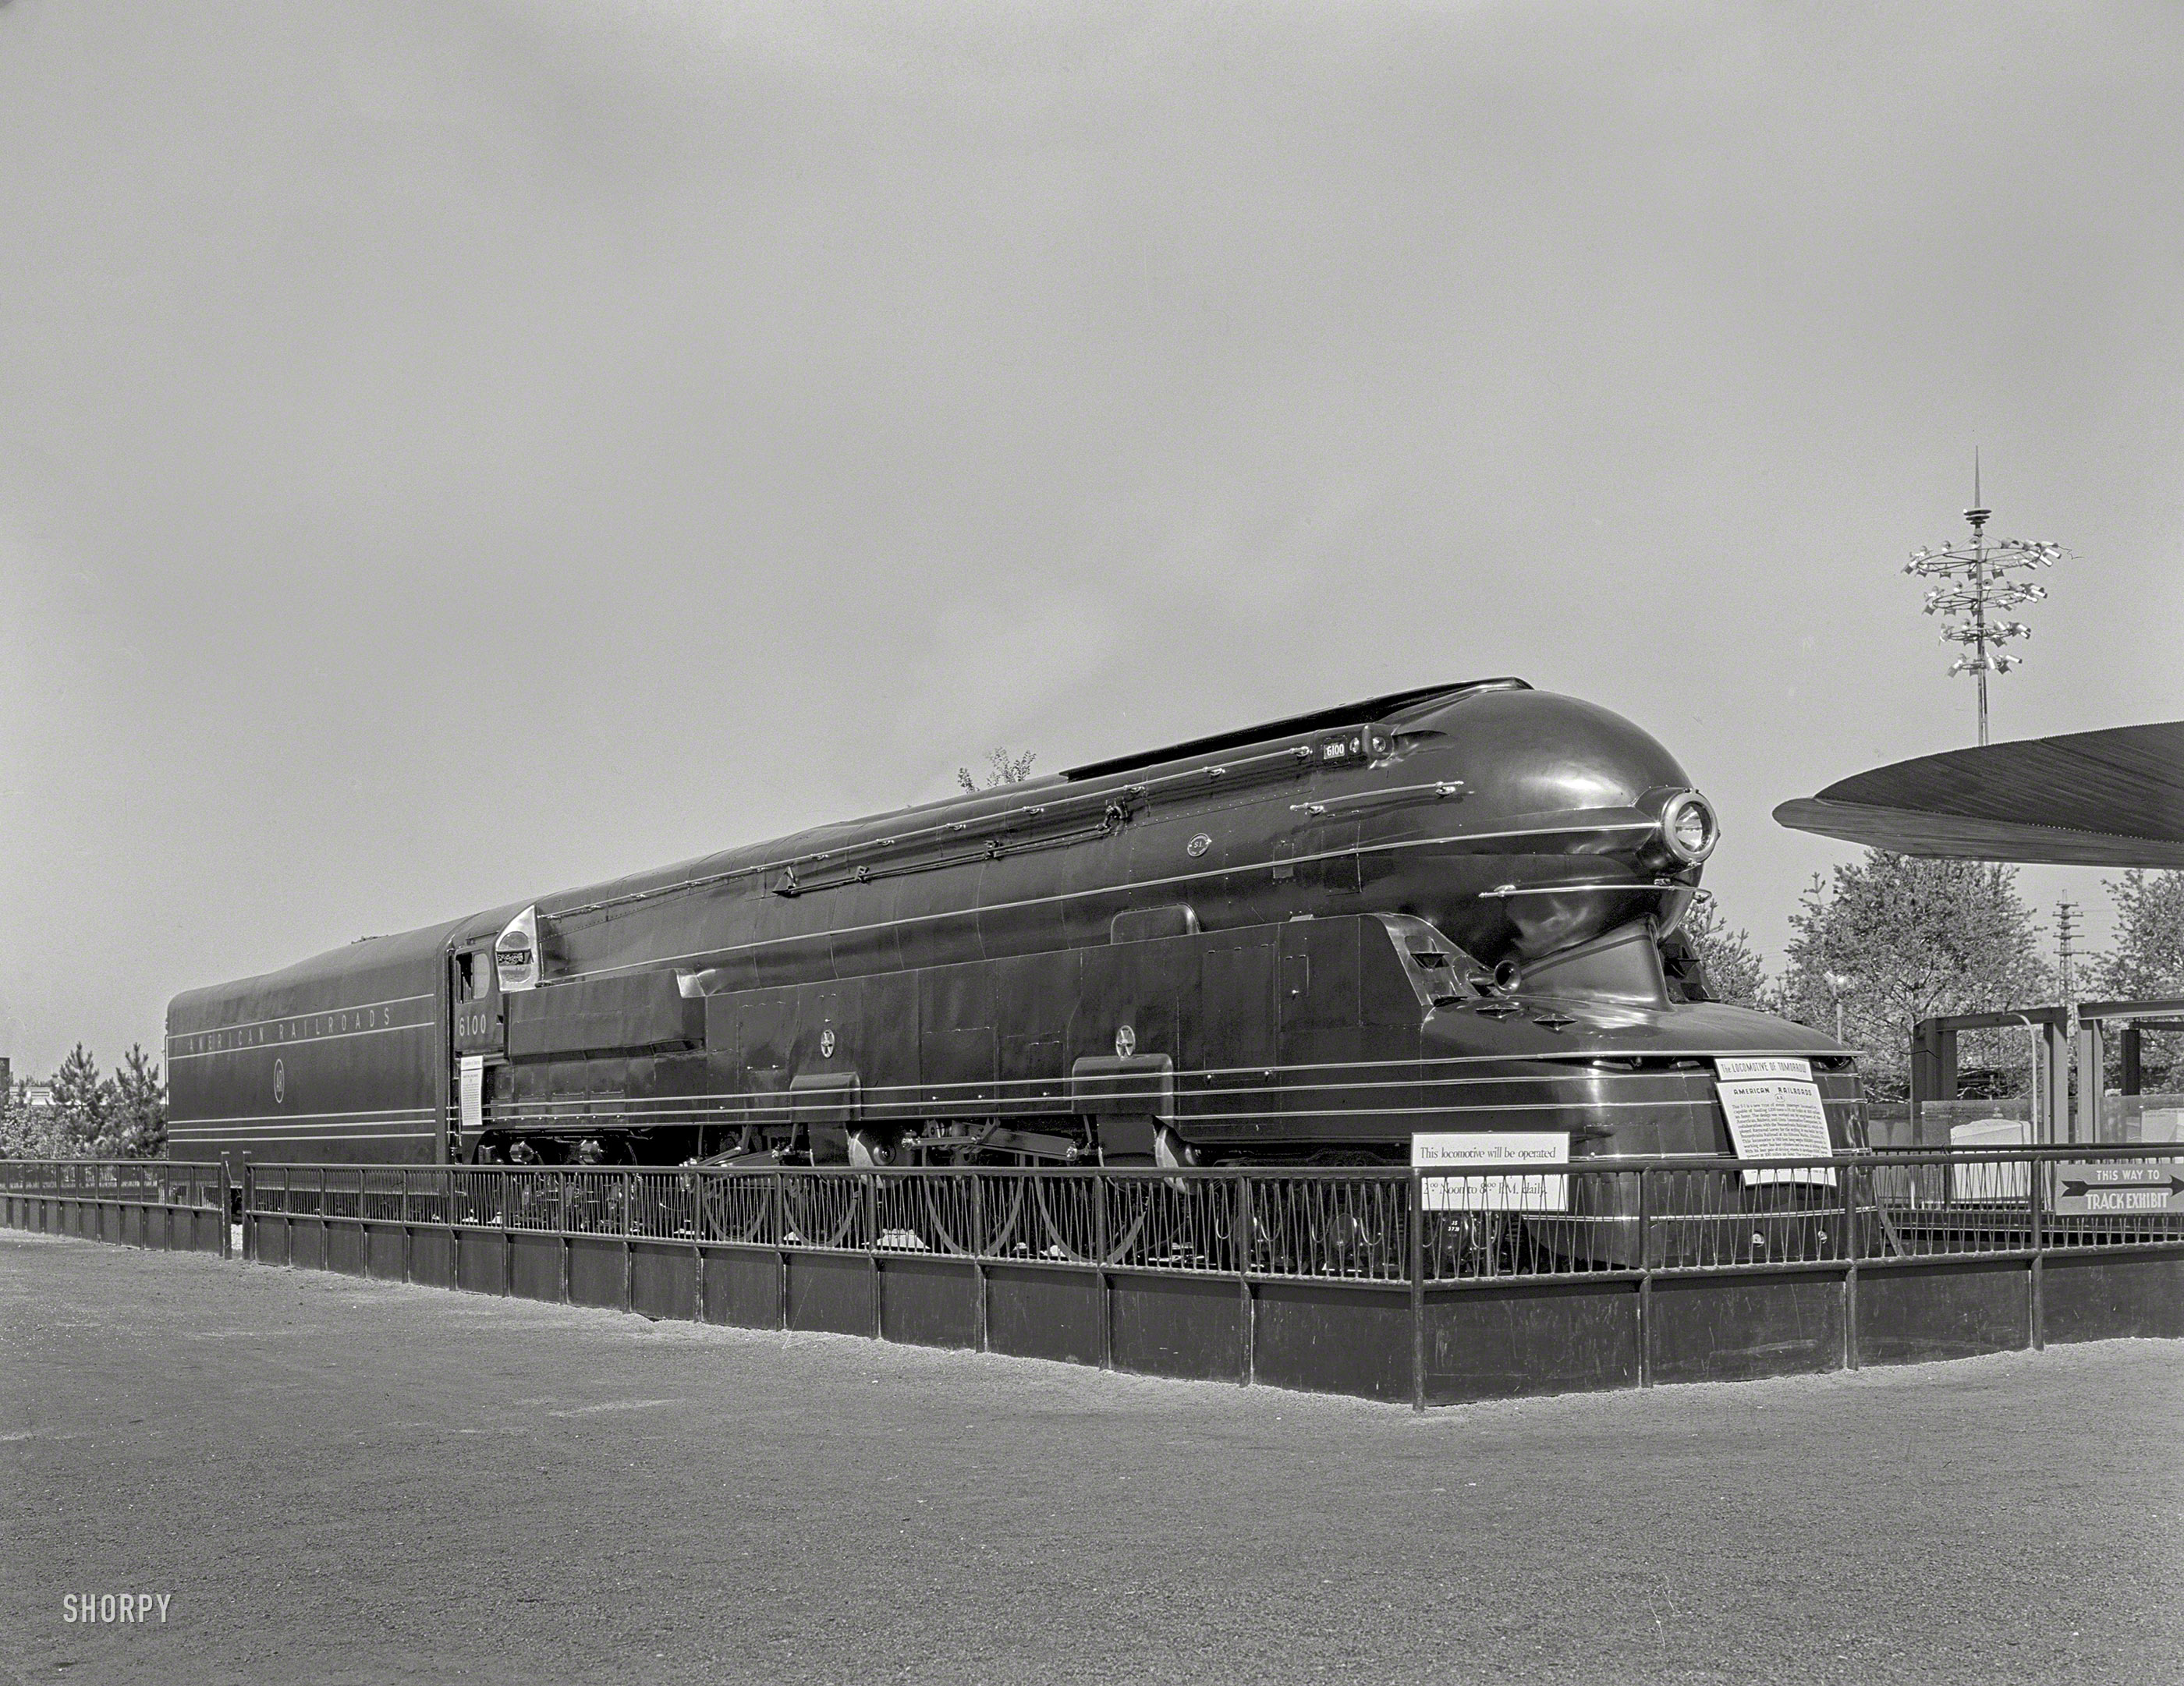 July 19, 1939. "New York World's Fair, railroad exhibit locomotives. Locomotive of Tomorrow, general view." Up next: The Caboose of Next Wednesday. Large-format acetate negative by Gottscho-Schleisner. View full size.